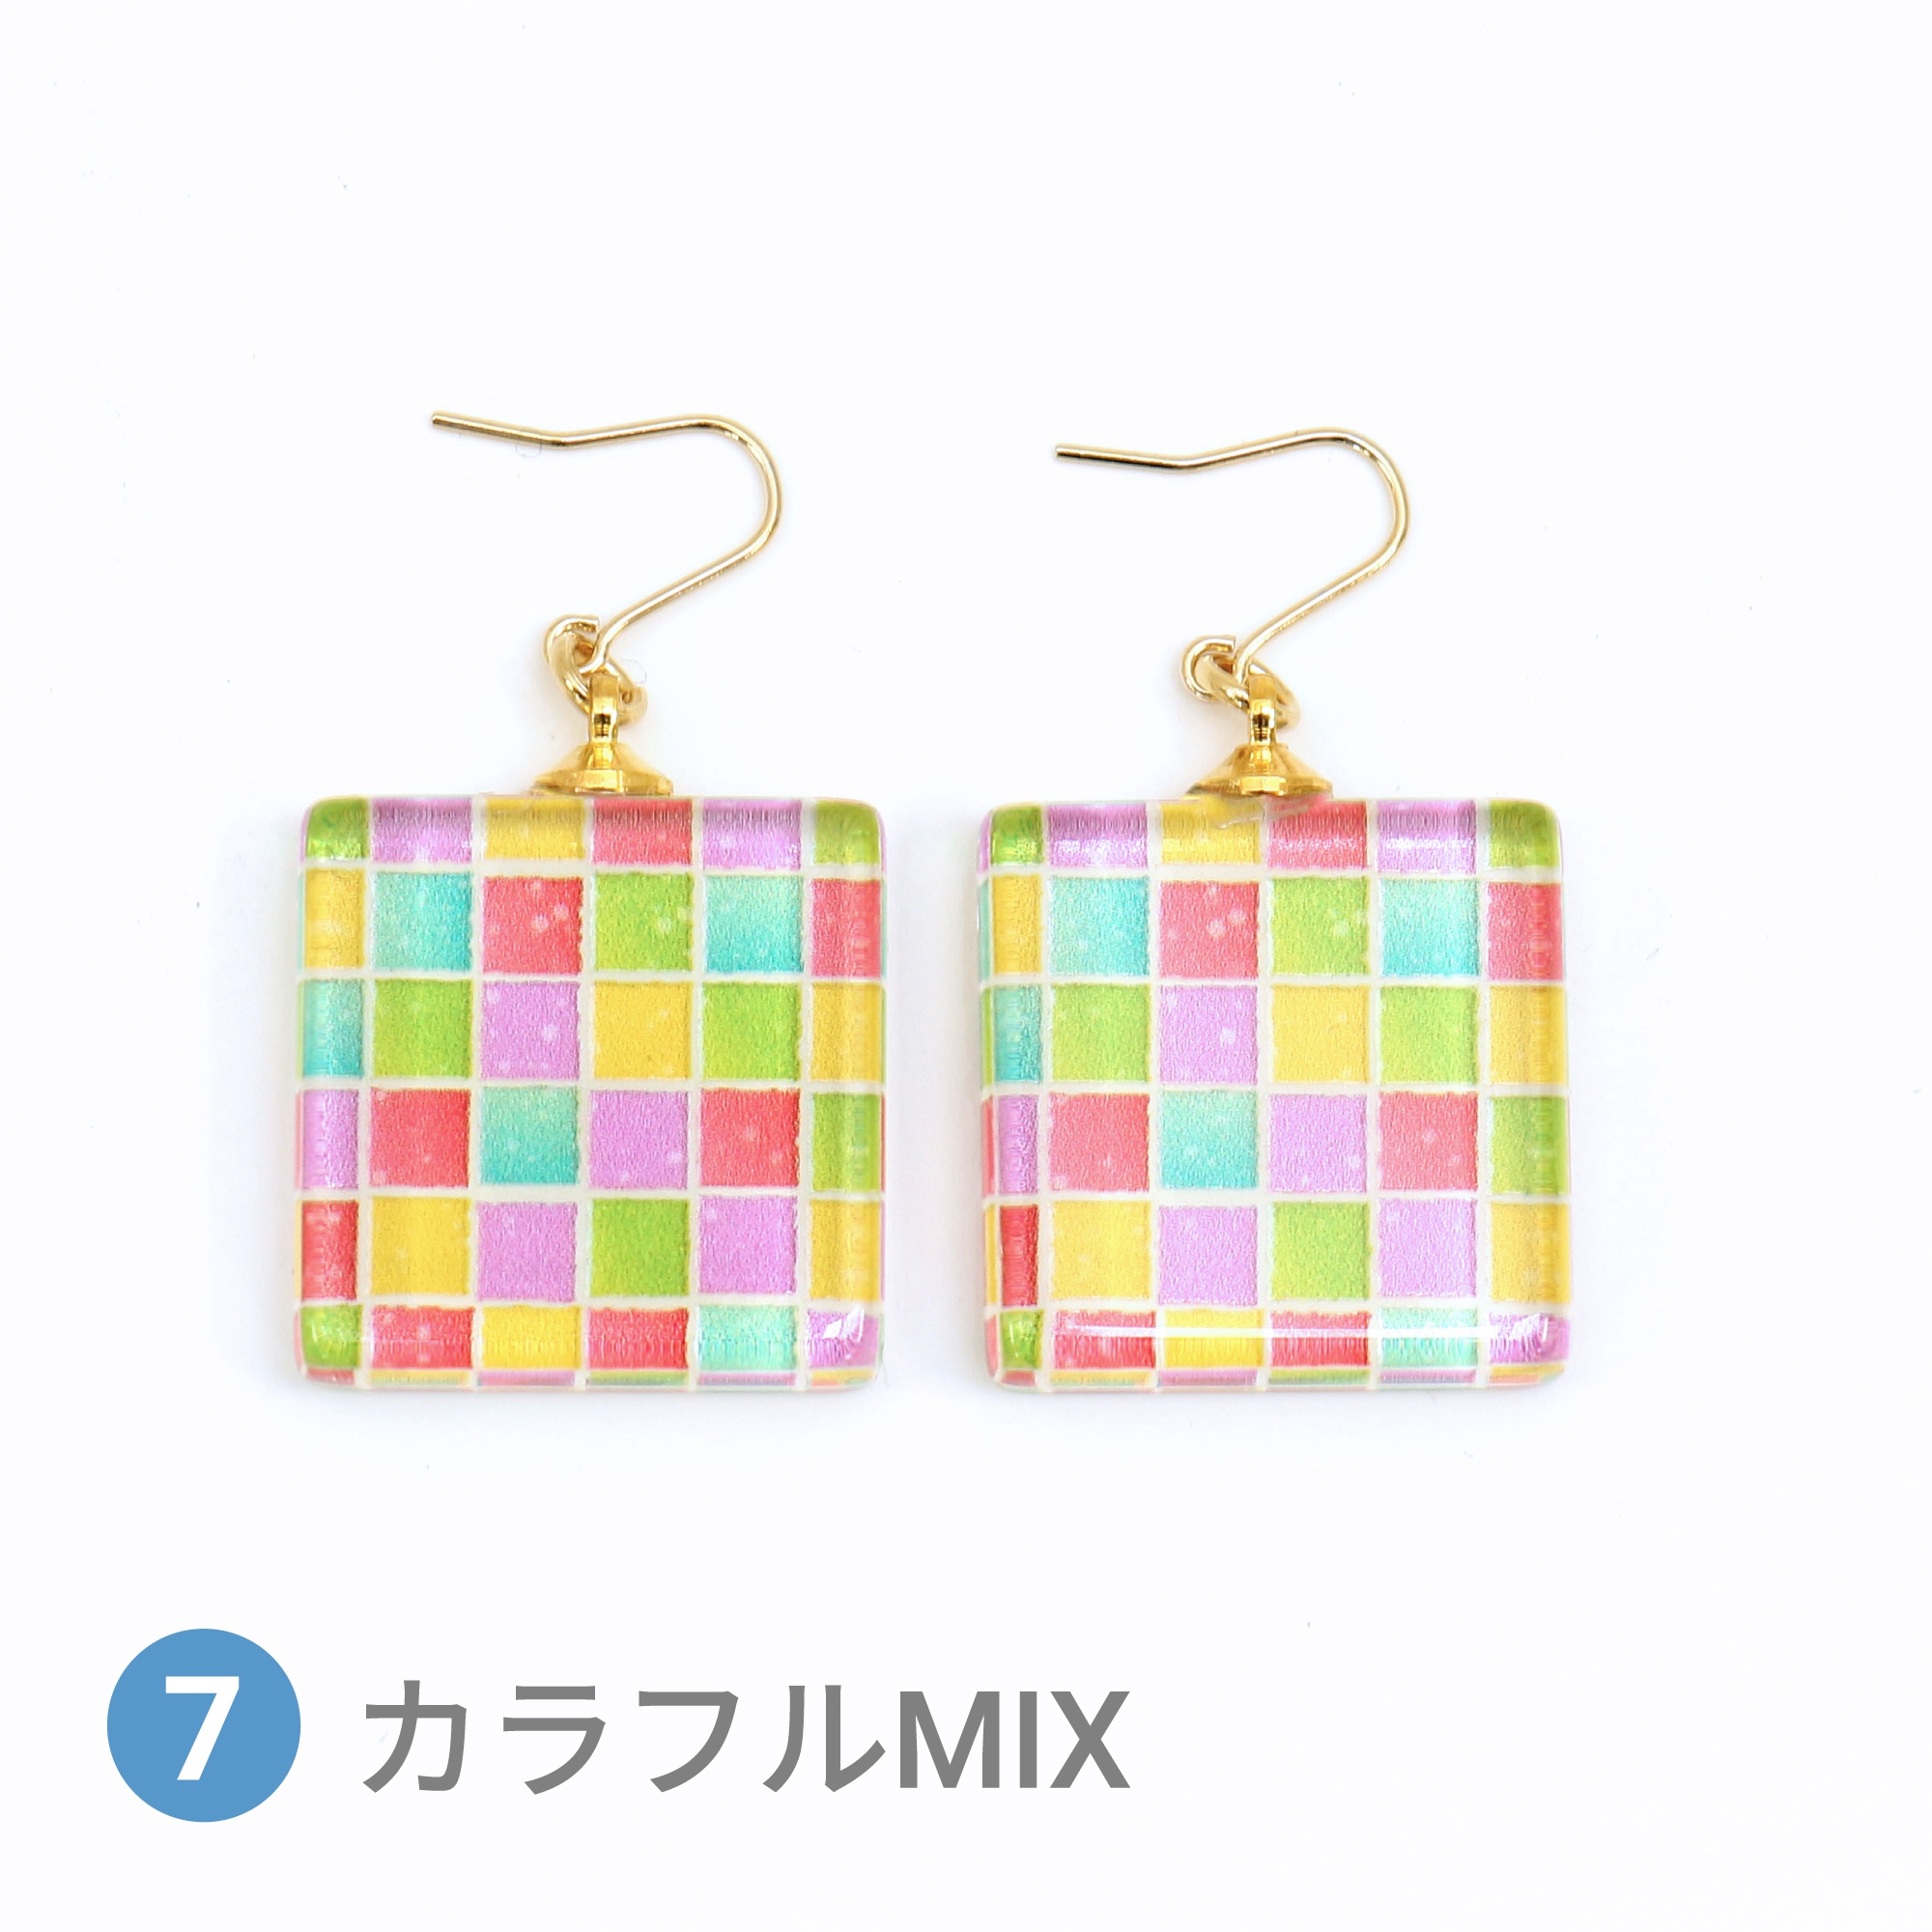 Glass accessories Pierced Earring TILE colorful mix square shape